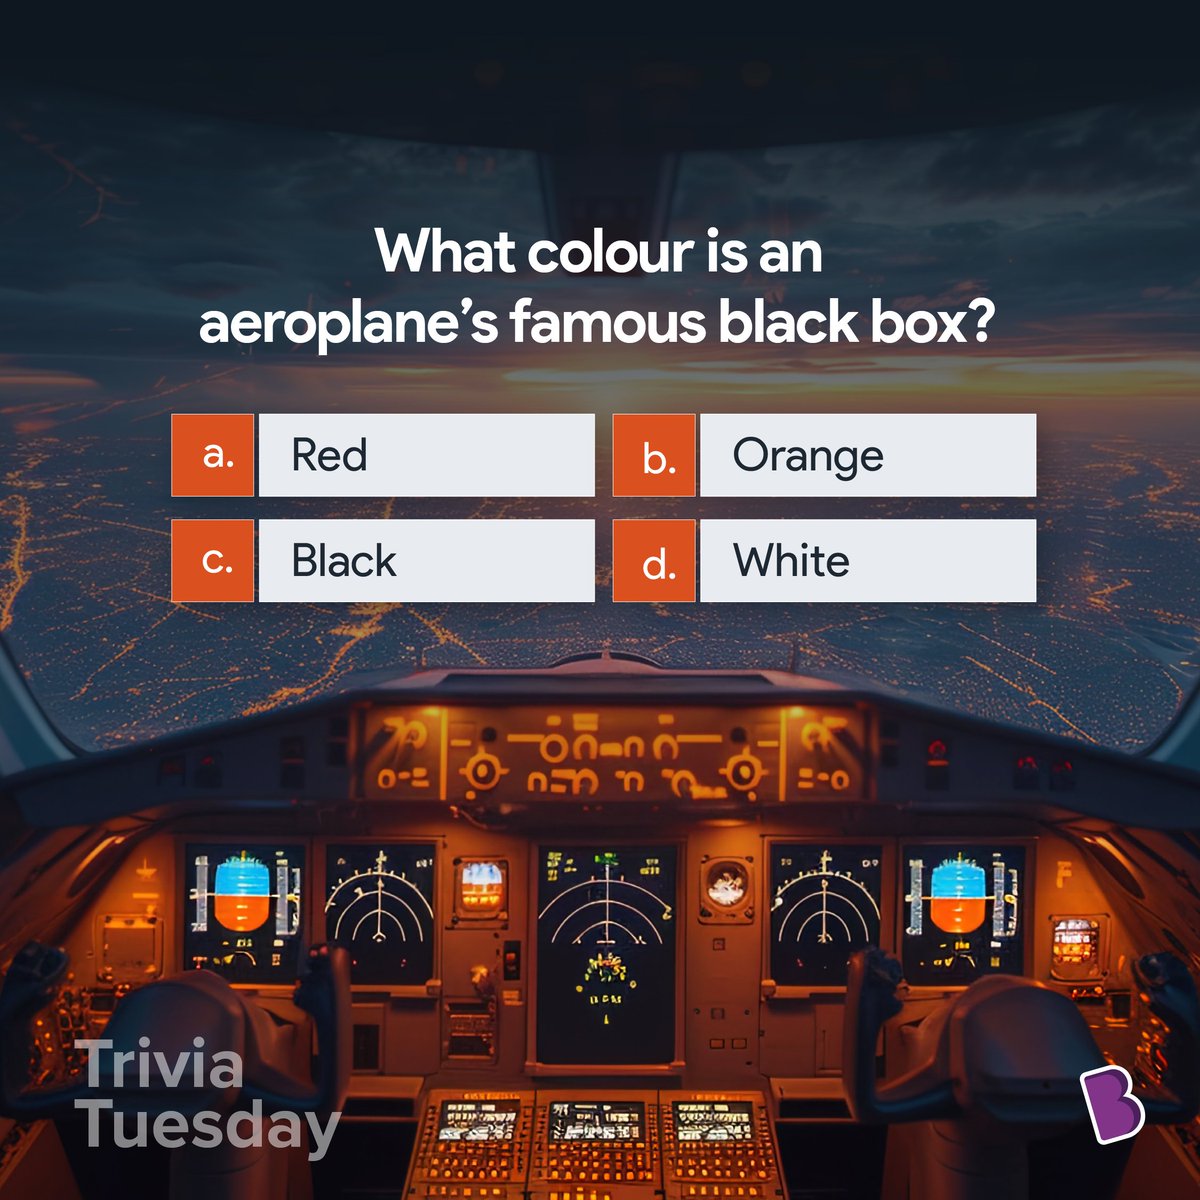 Ever wondered why they call it a 'black box' when it's not even black? Let me know your guess in the comments below! #aviationtrivia #planefacts #TriviaTuesday #trivia #byjus #byjuslearning #byjusthelearningapp #curiosity #enhanceyourpotential